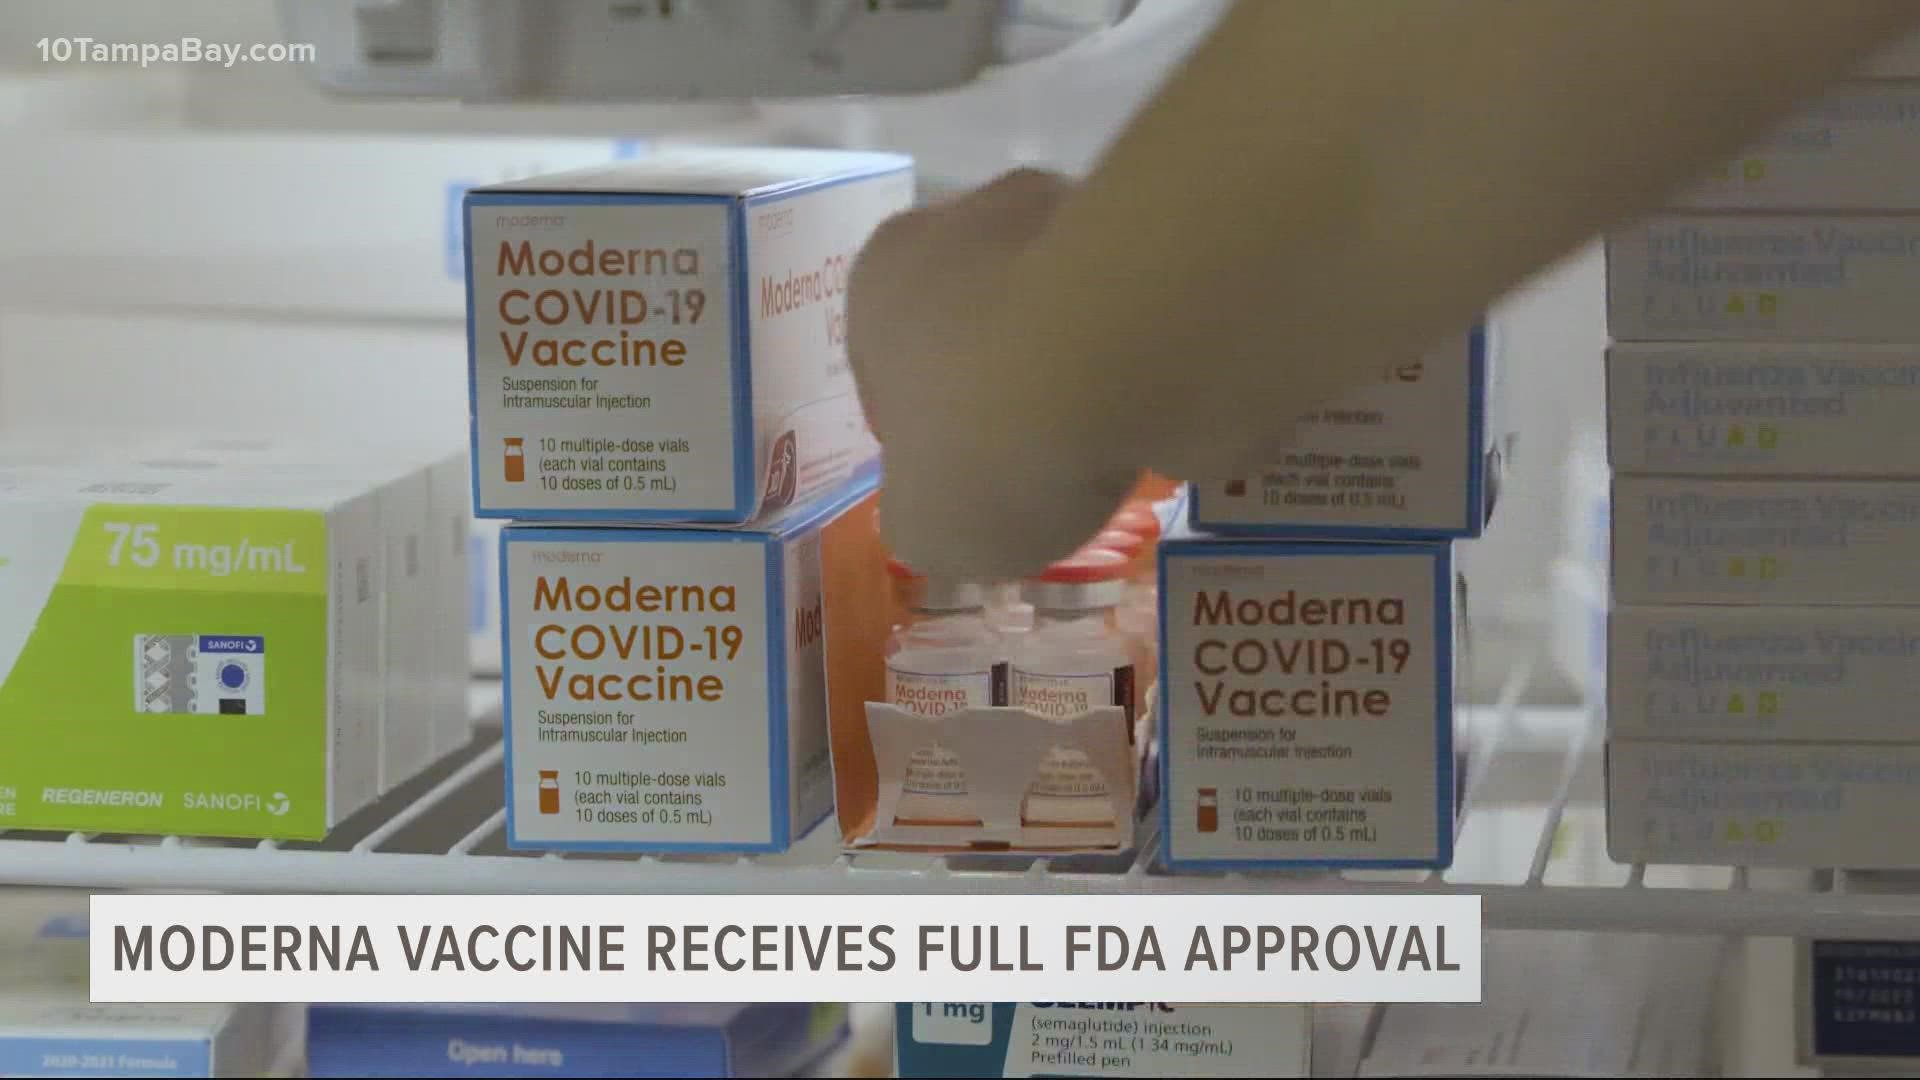 The vaccine is now the second fully approved inoculation against COVID-19 in the U.S.